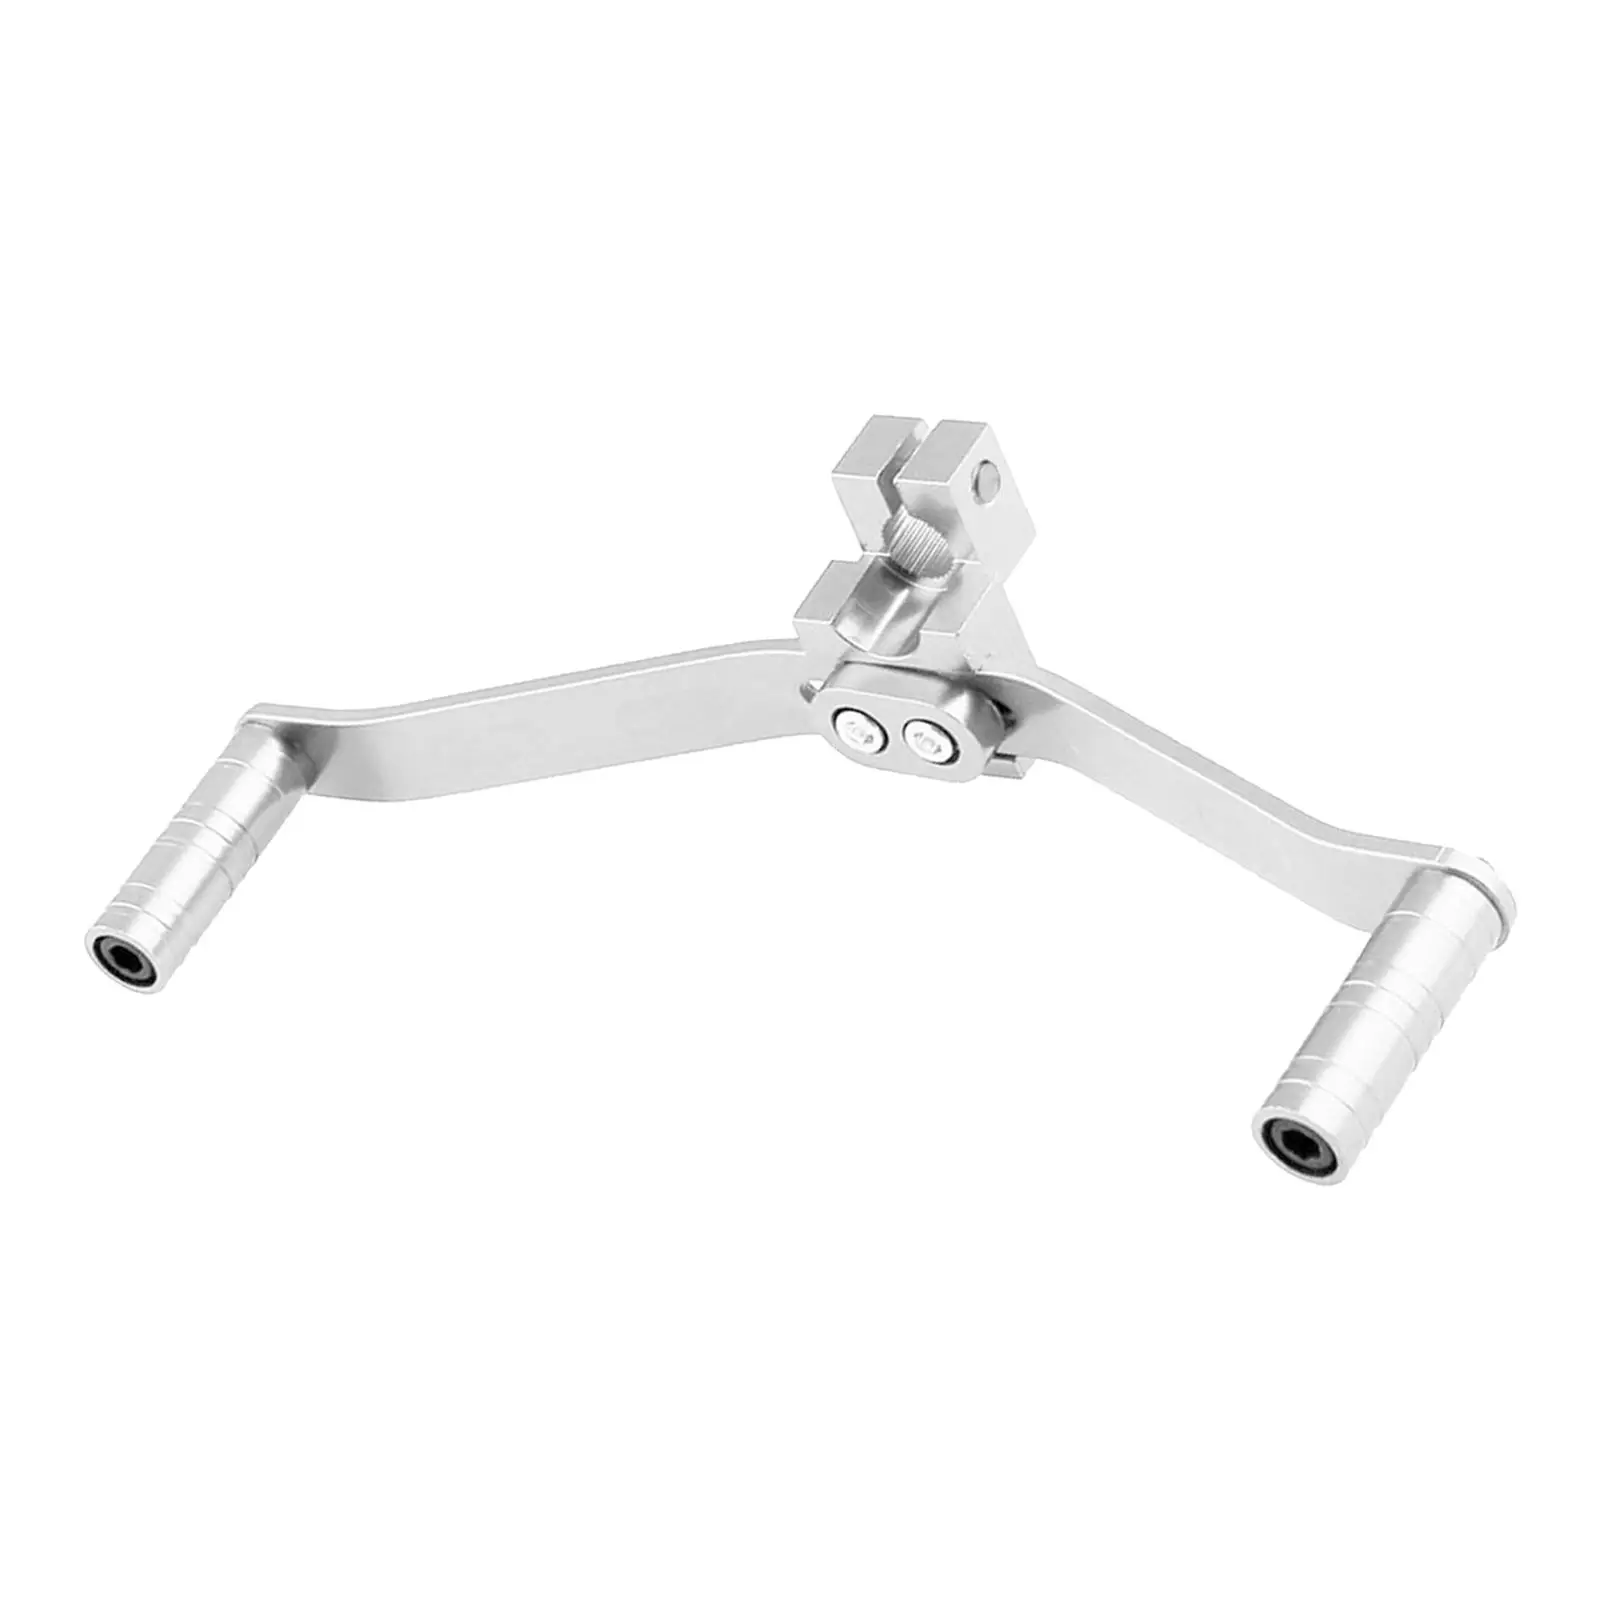 Gear Lever Accessories Universal Footrest Pedal er for Motocross Motorbike